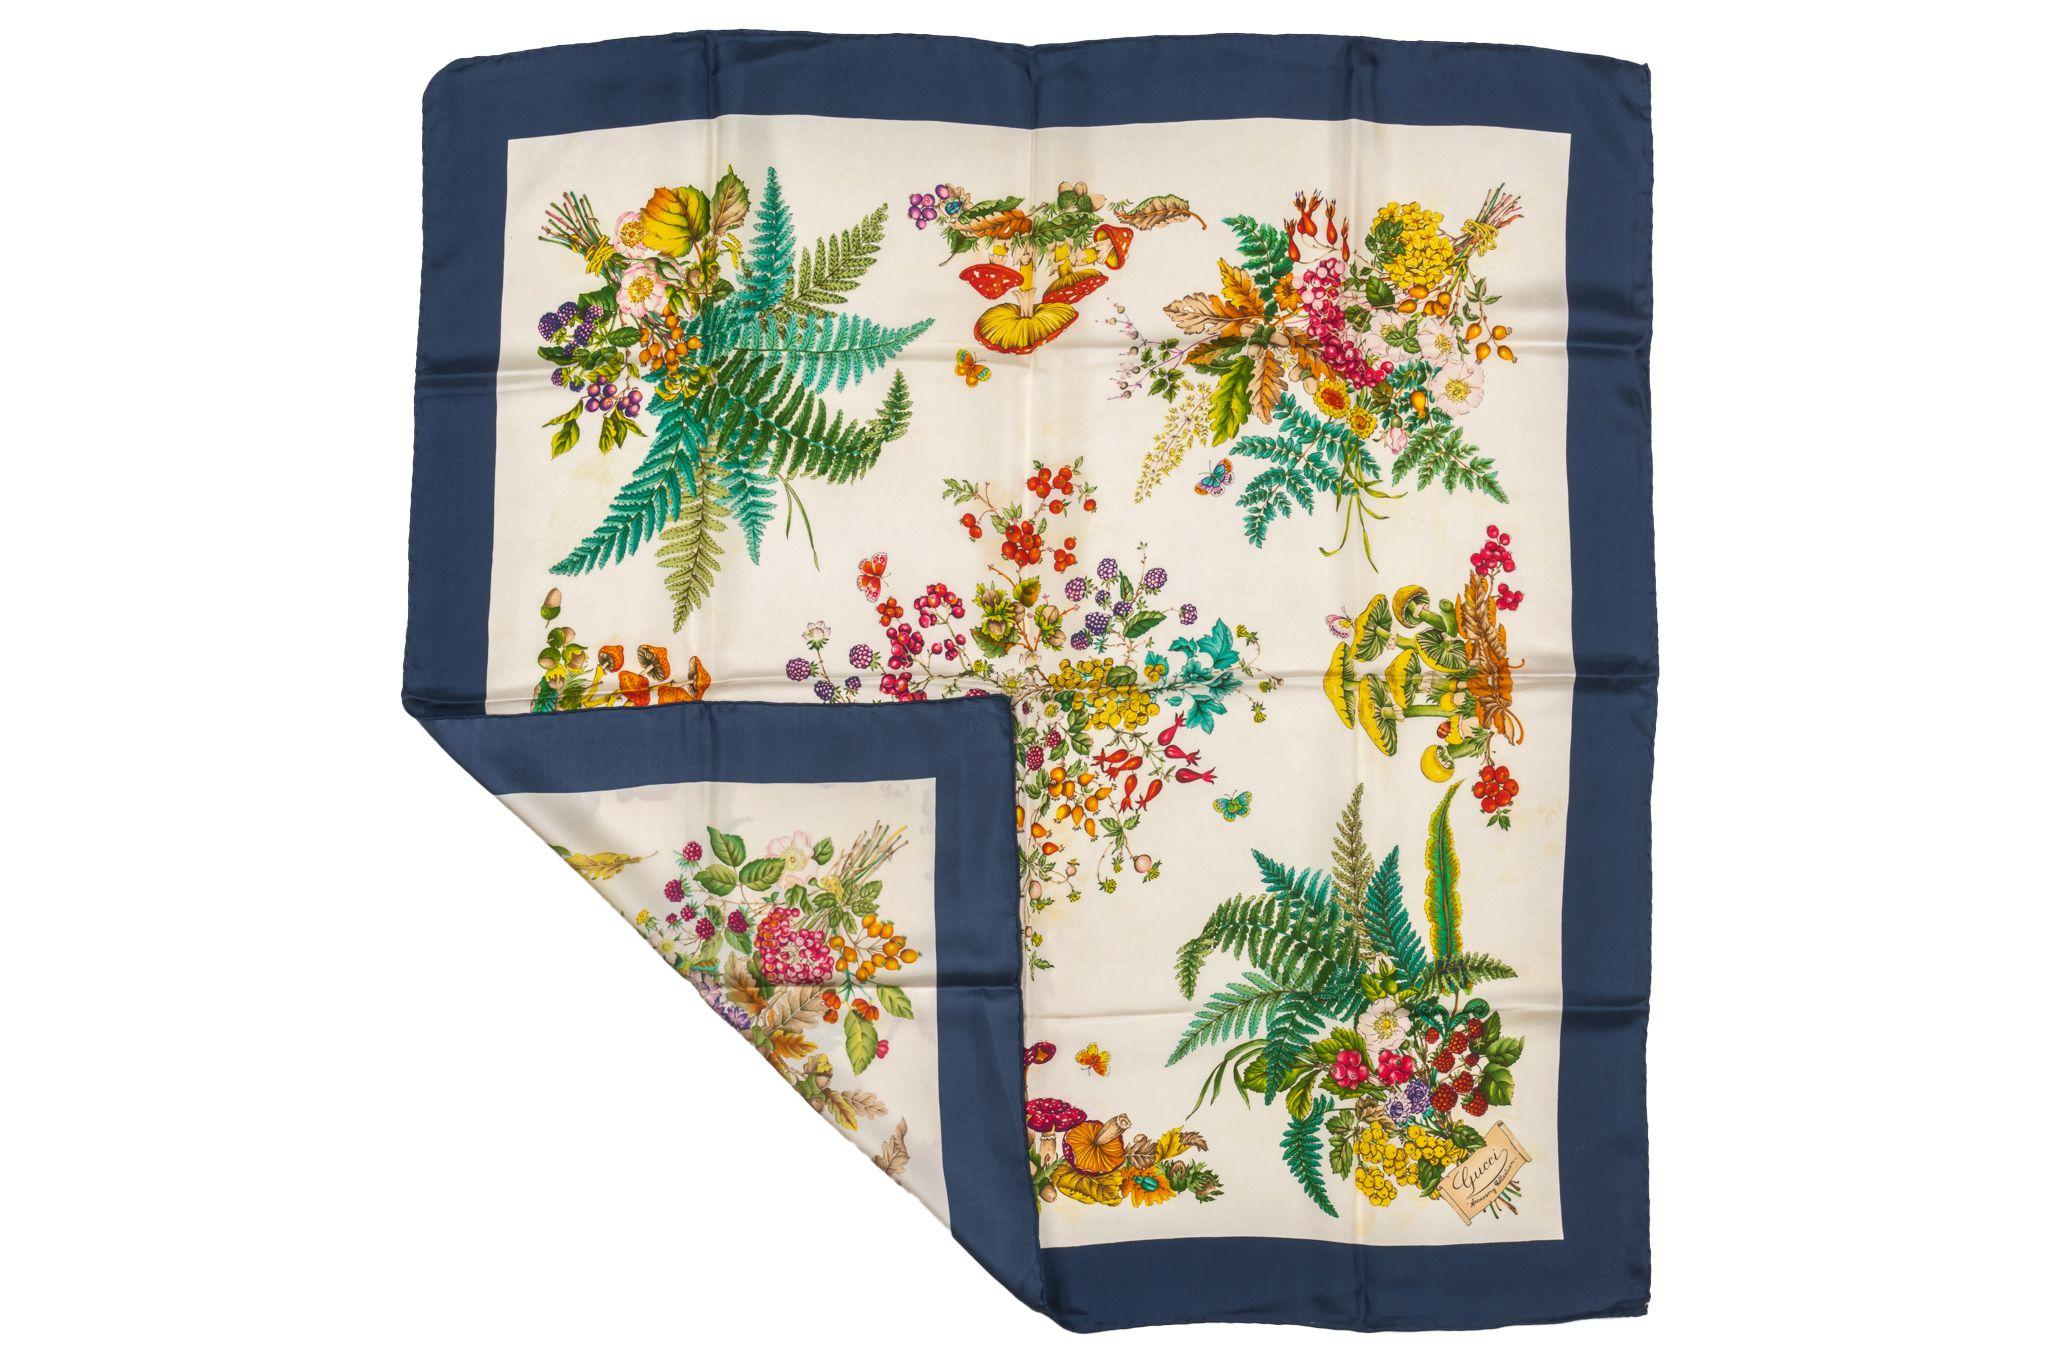 Gucci Vintage floral scarf made of silk. The center is a pattern of different flower arrangements while the frame comes in blue. The piece is in excellent condition.